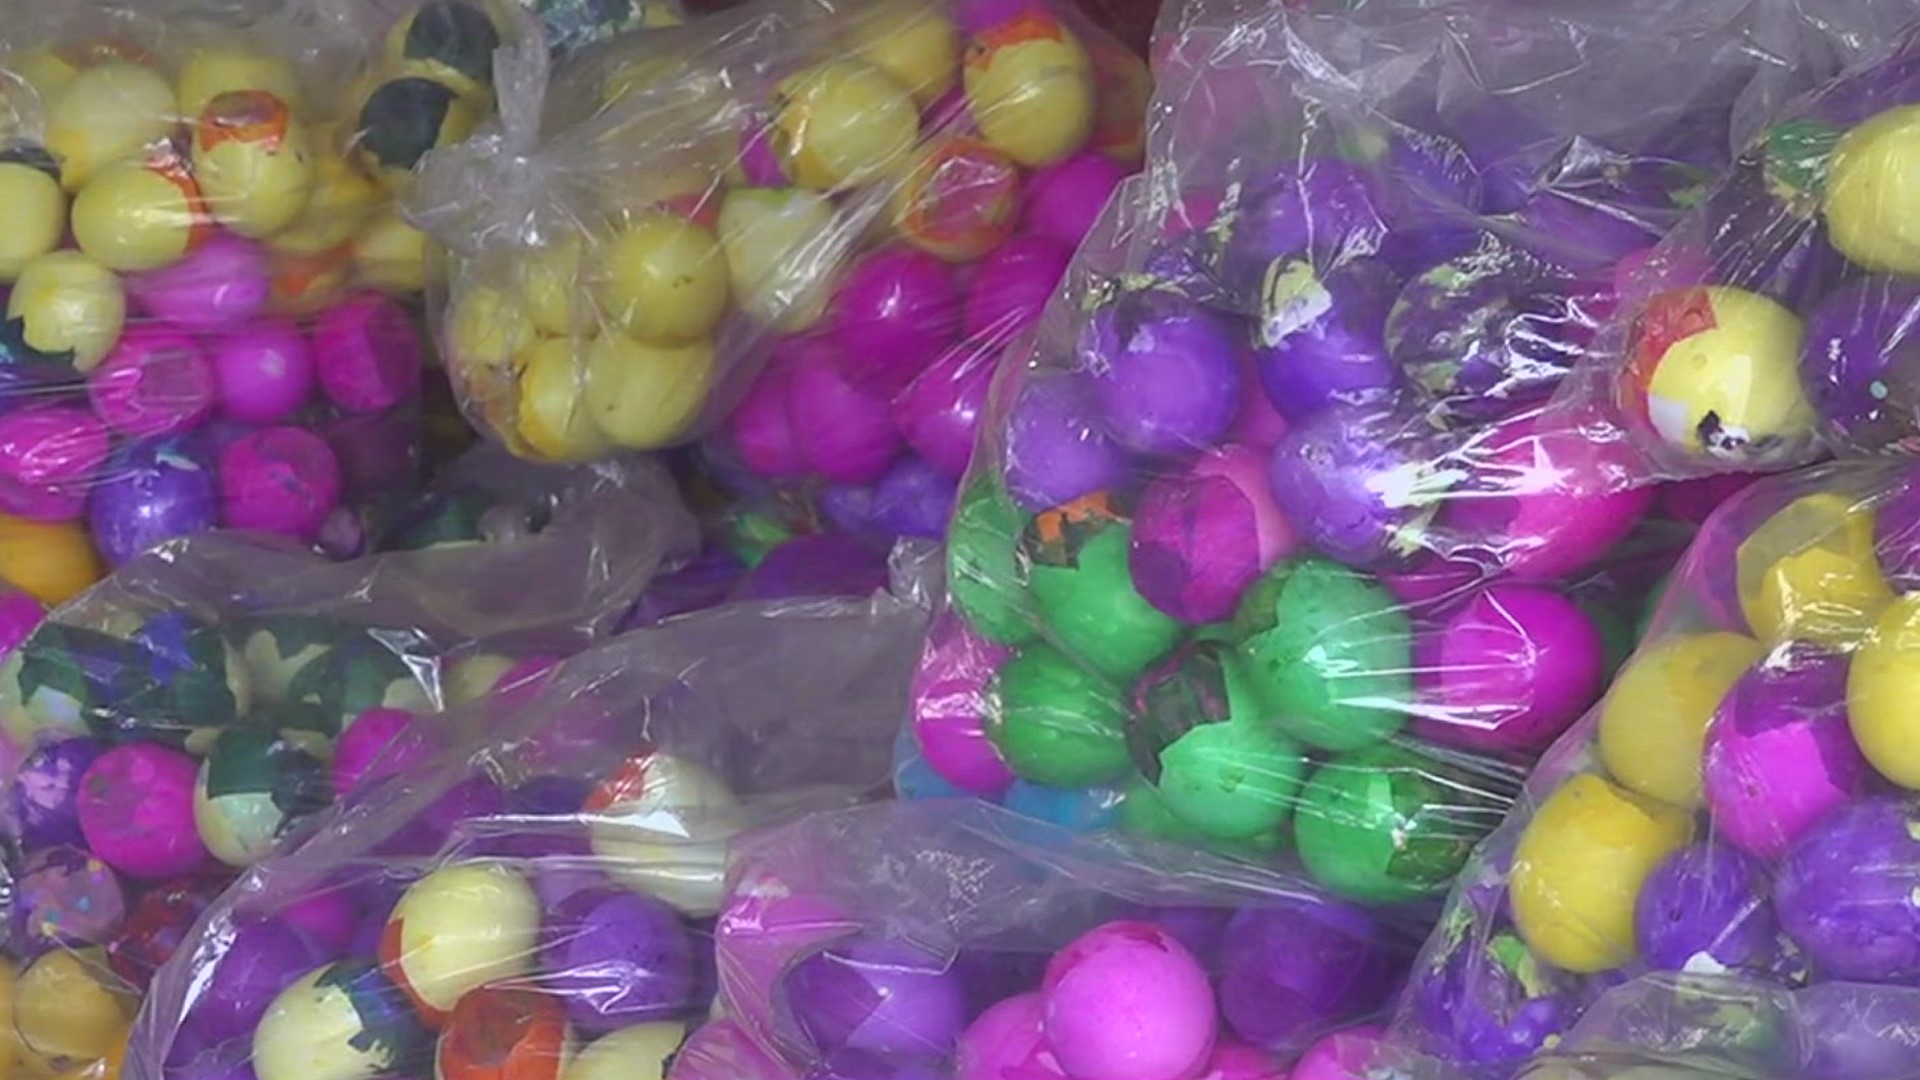 Due to the price of eggs, the South Texas tradition might cost a little more this year.